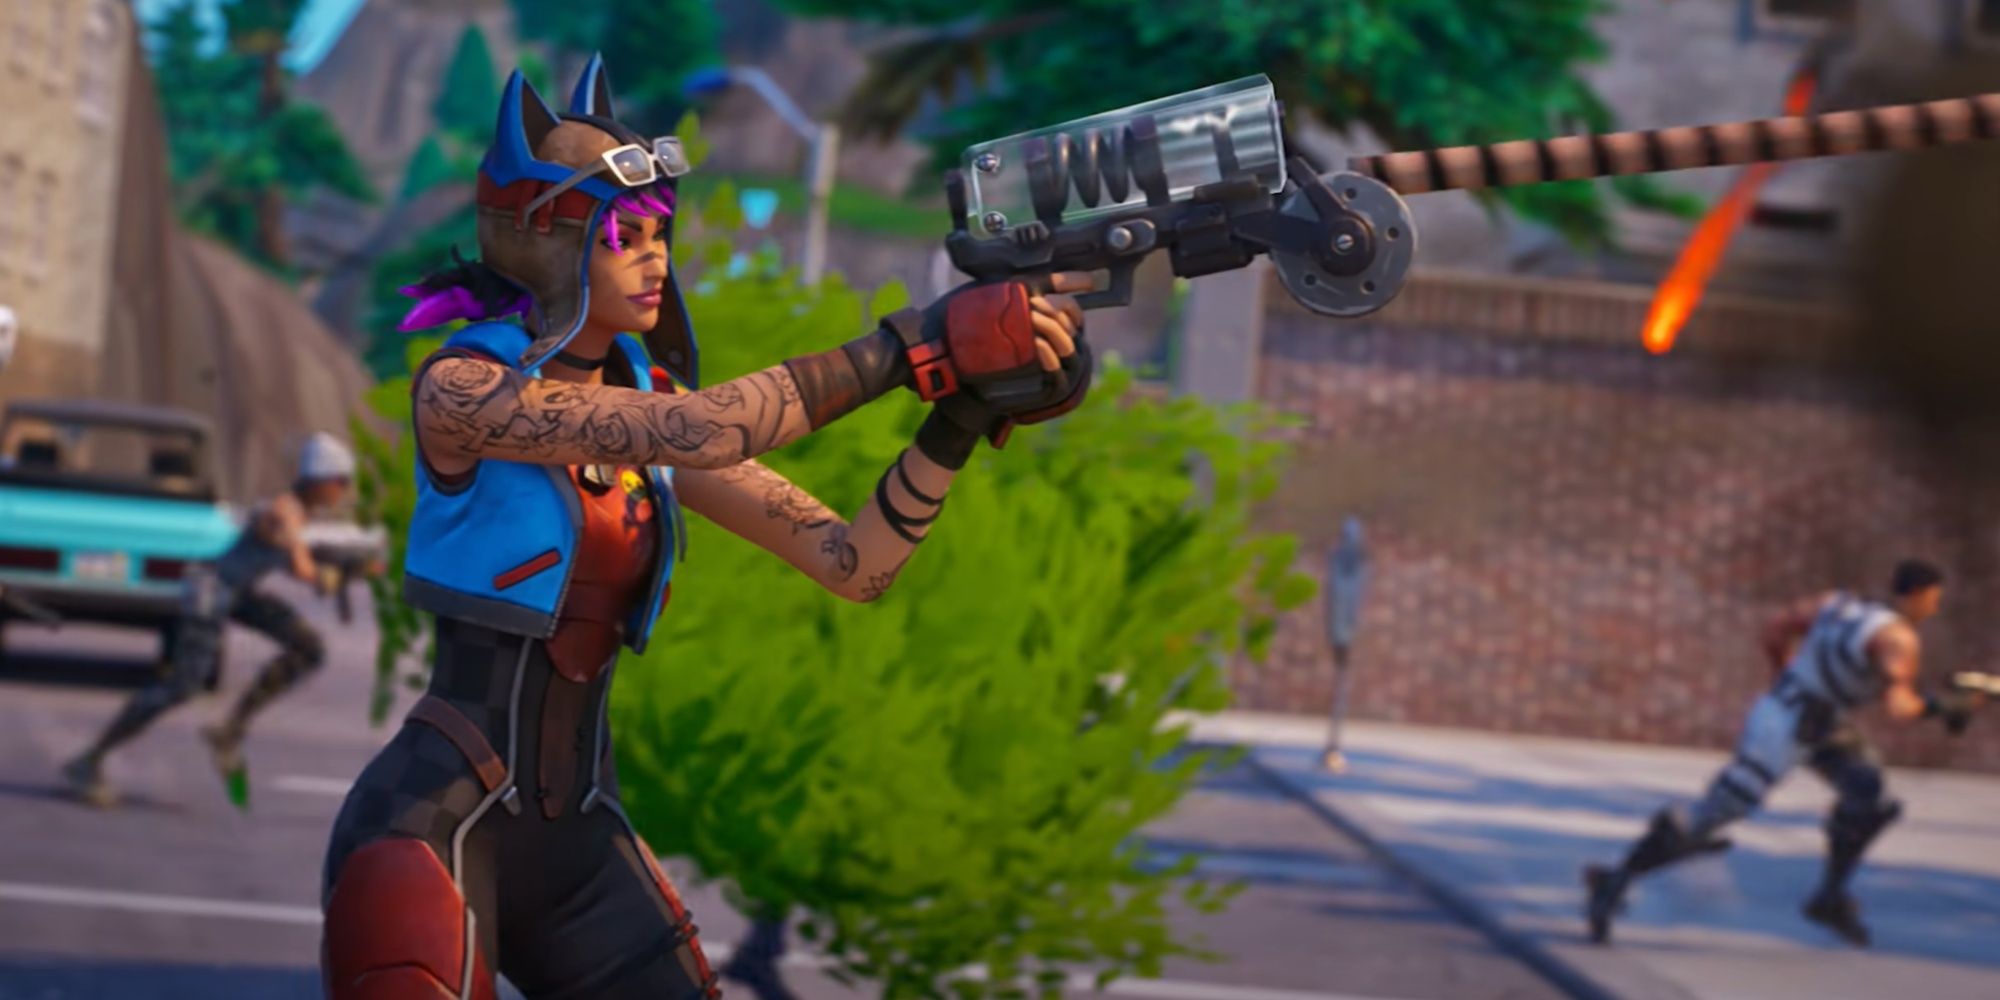 renegade lynx using grappler in tilted towers